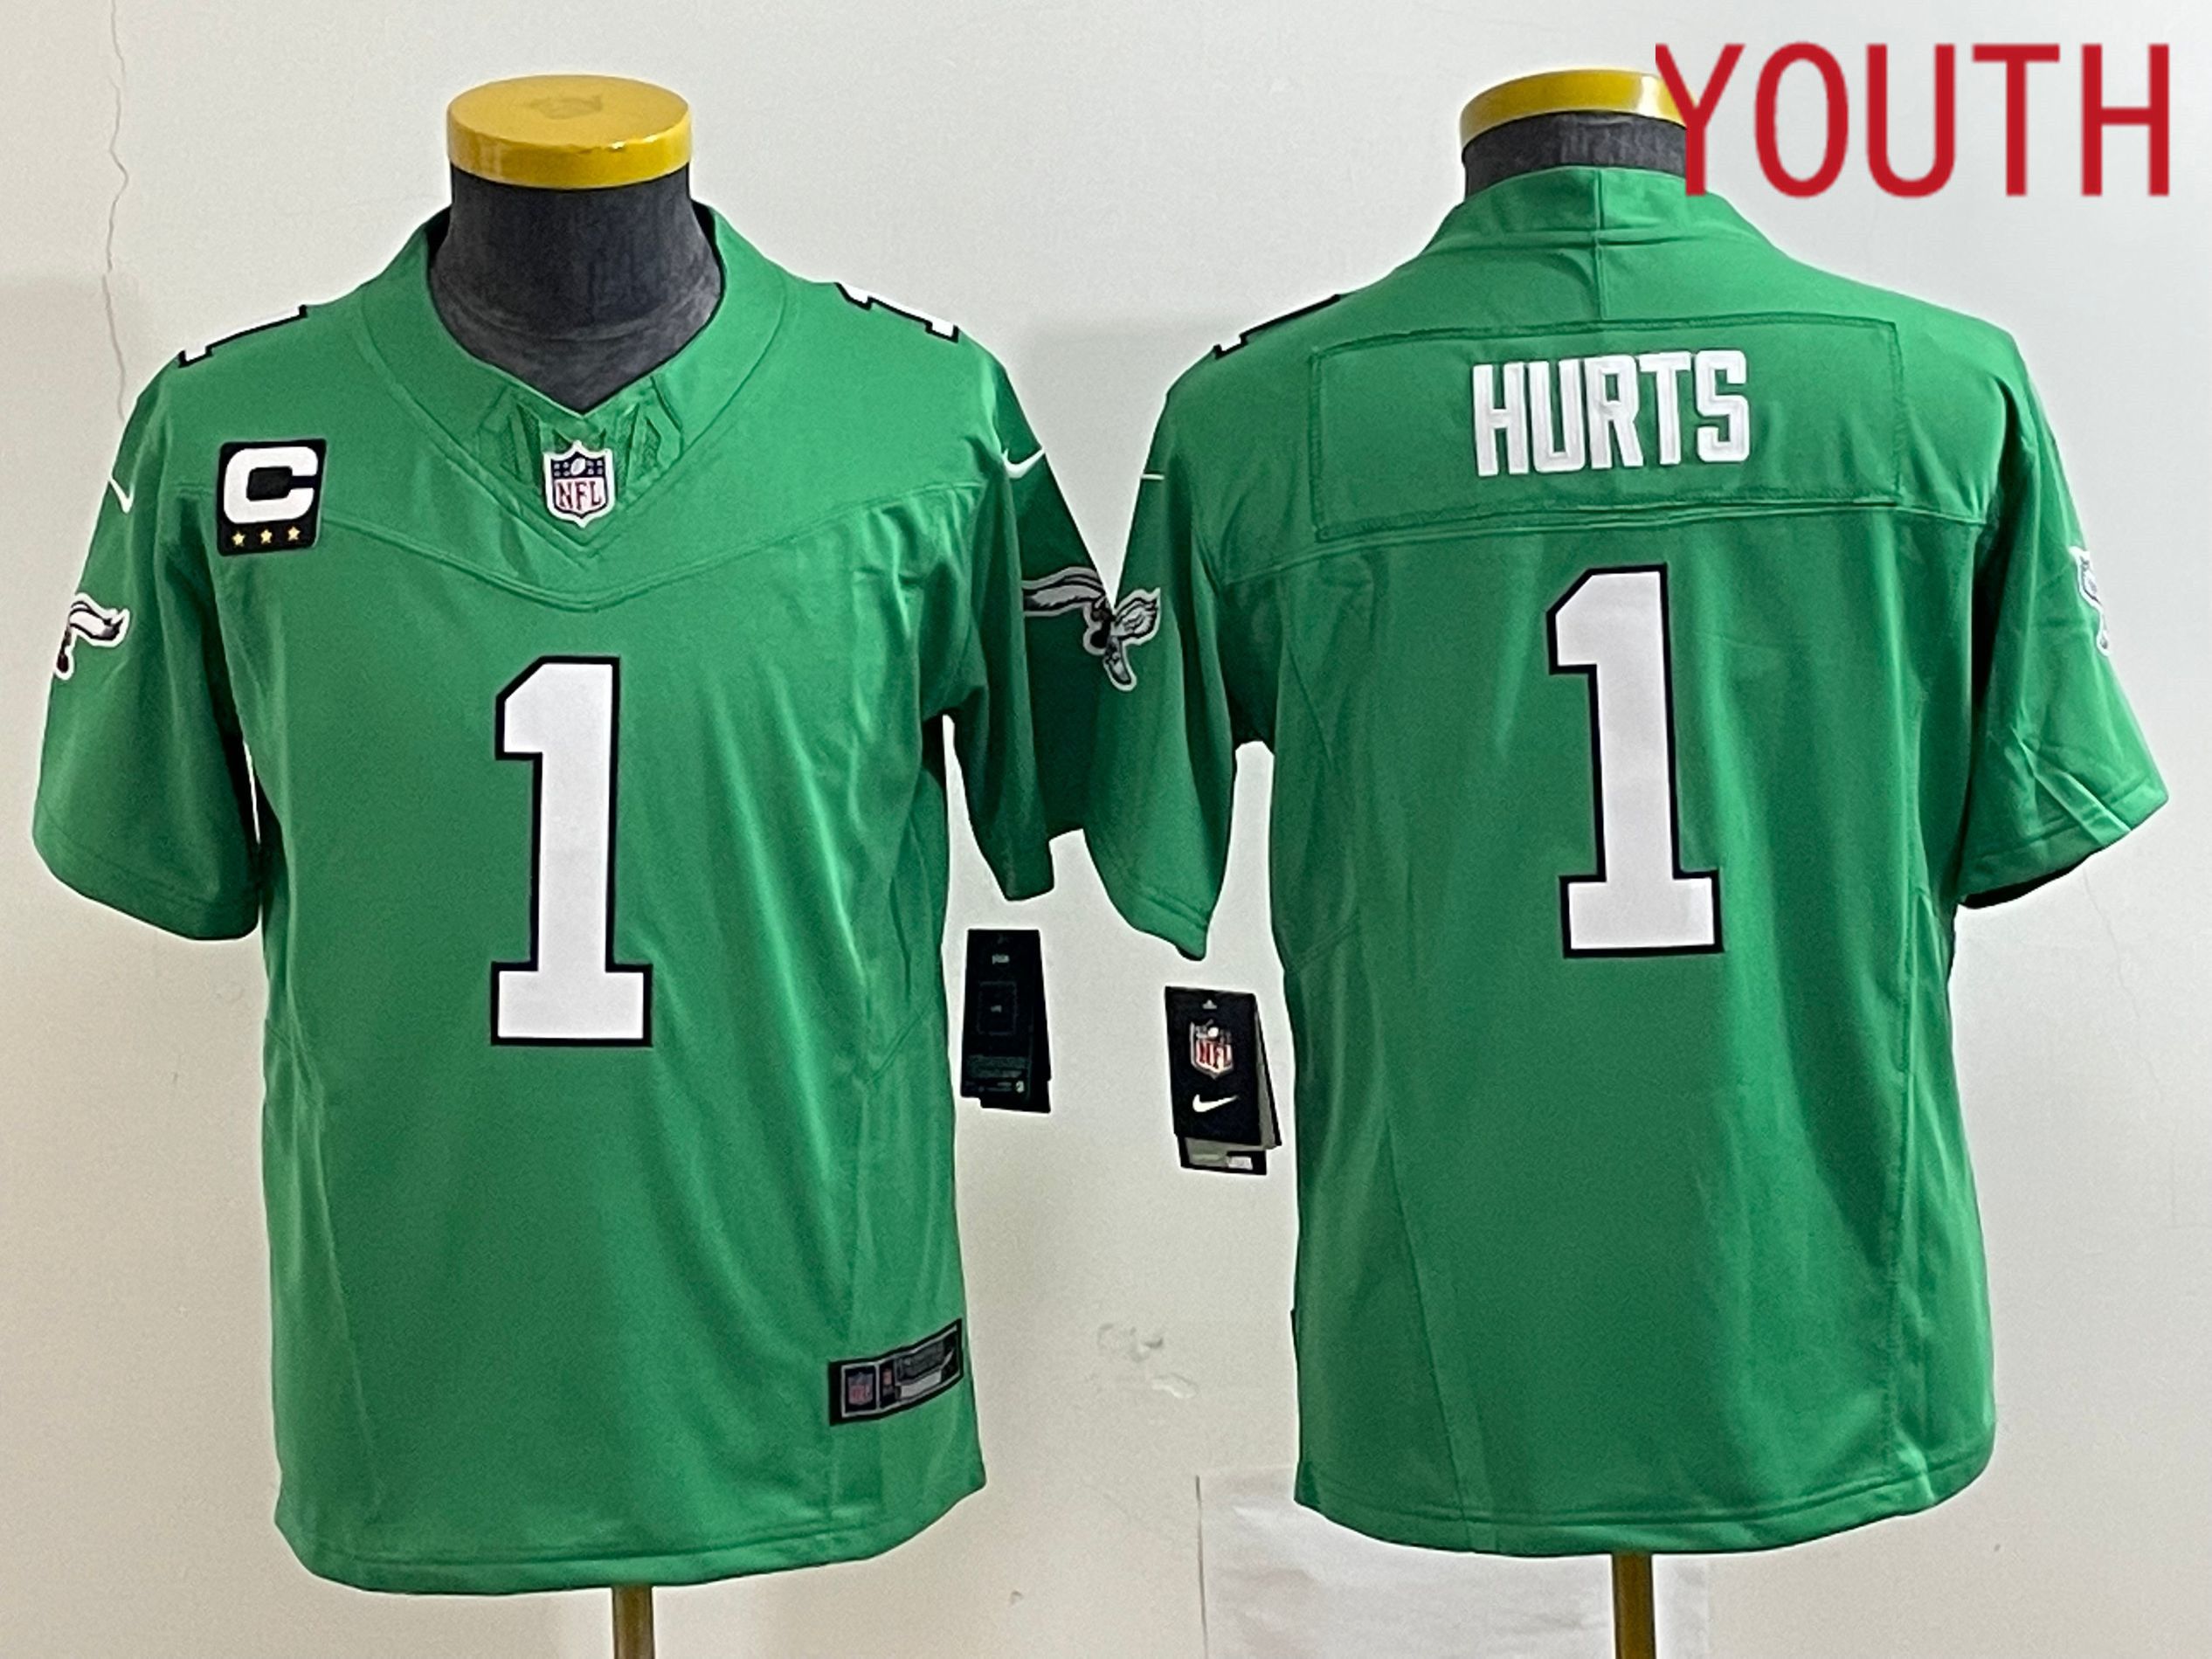 Youth Philadelphia Eagles #1 Hurts Green Nike Throwback Vapor Limited NFL Jerseys->youth nfl jersey->Youth Jersey